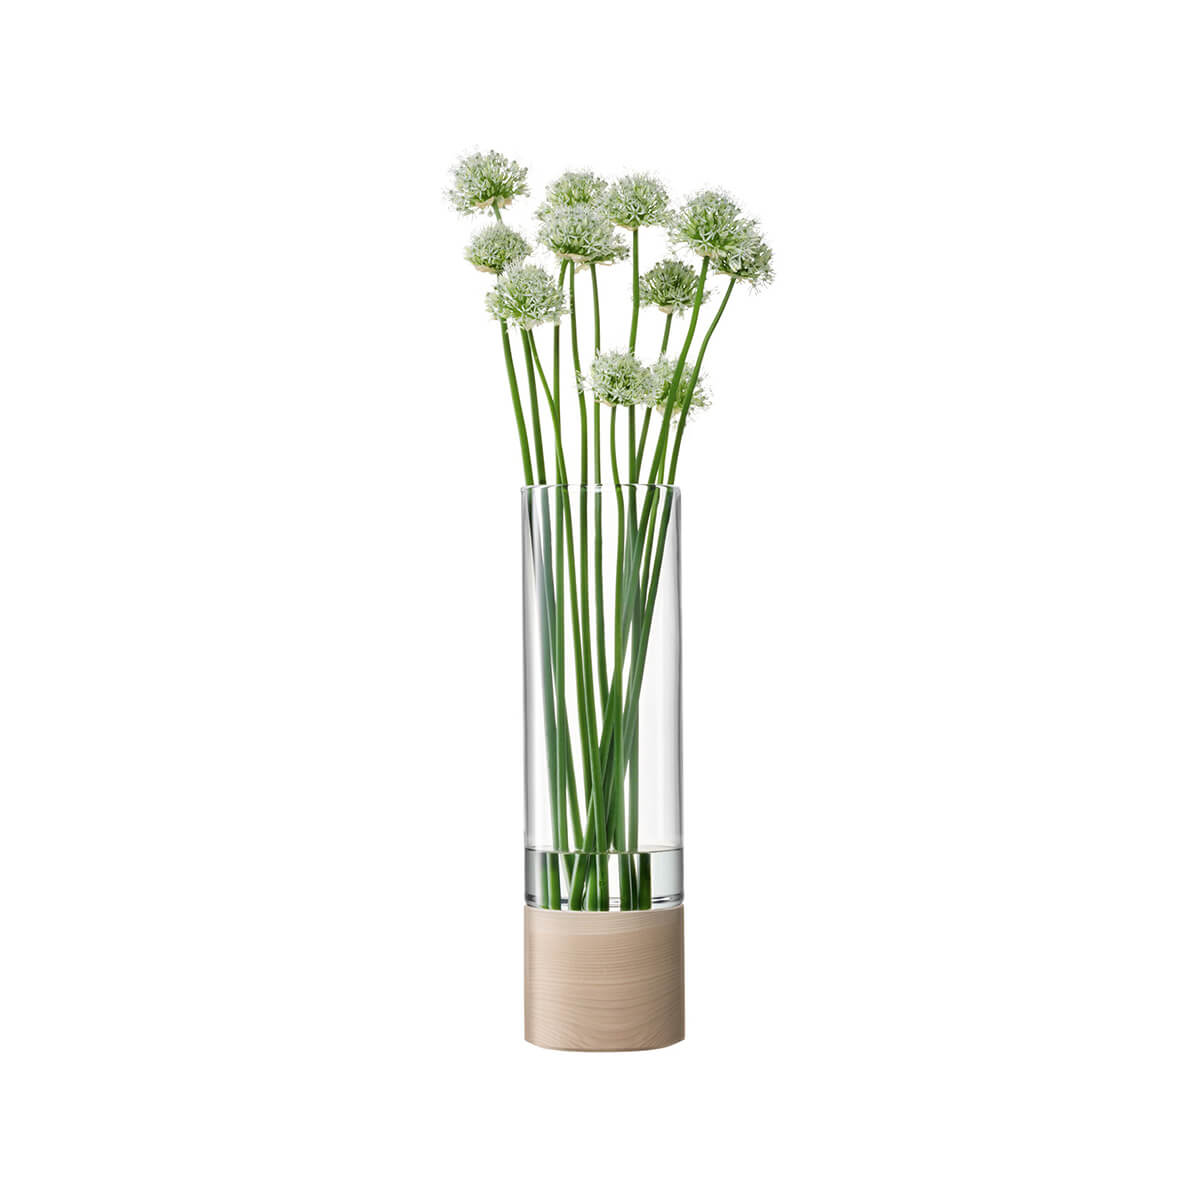 Luminaire Home Decor > Vases Collection: Ikebana Vases, Sack Porcelain Vase,  Aalto Vase and much more